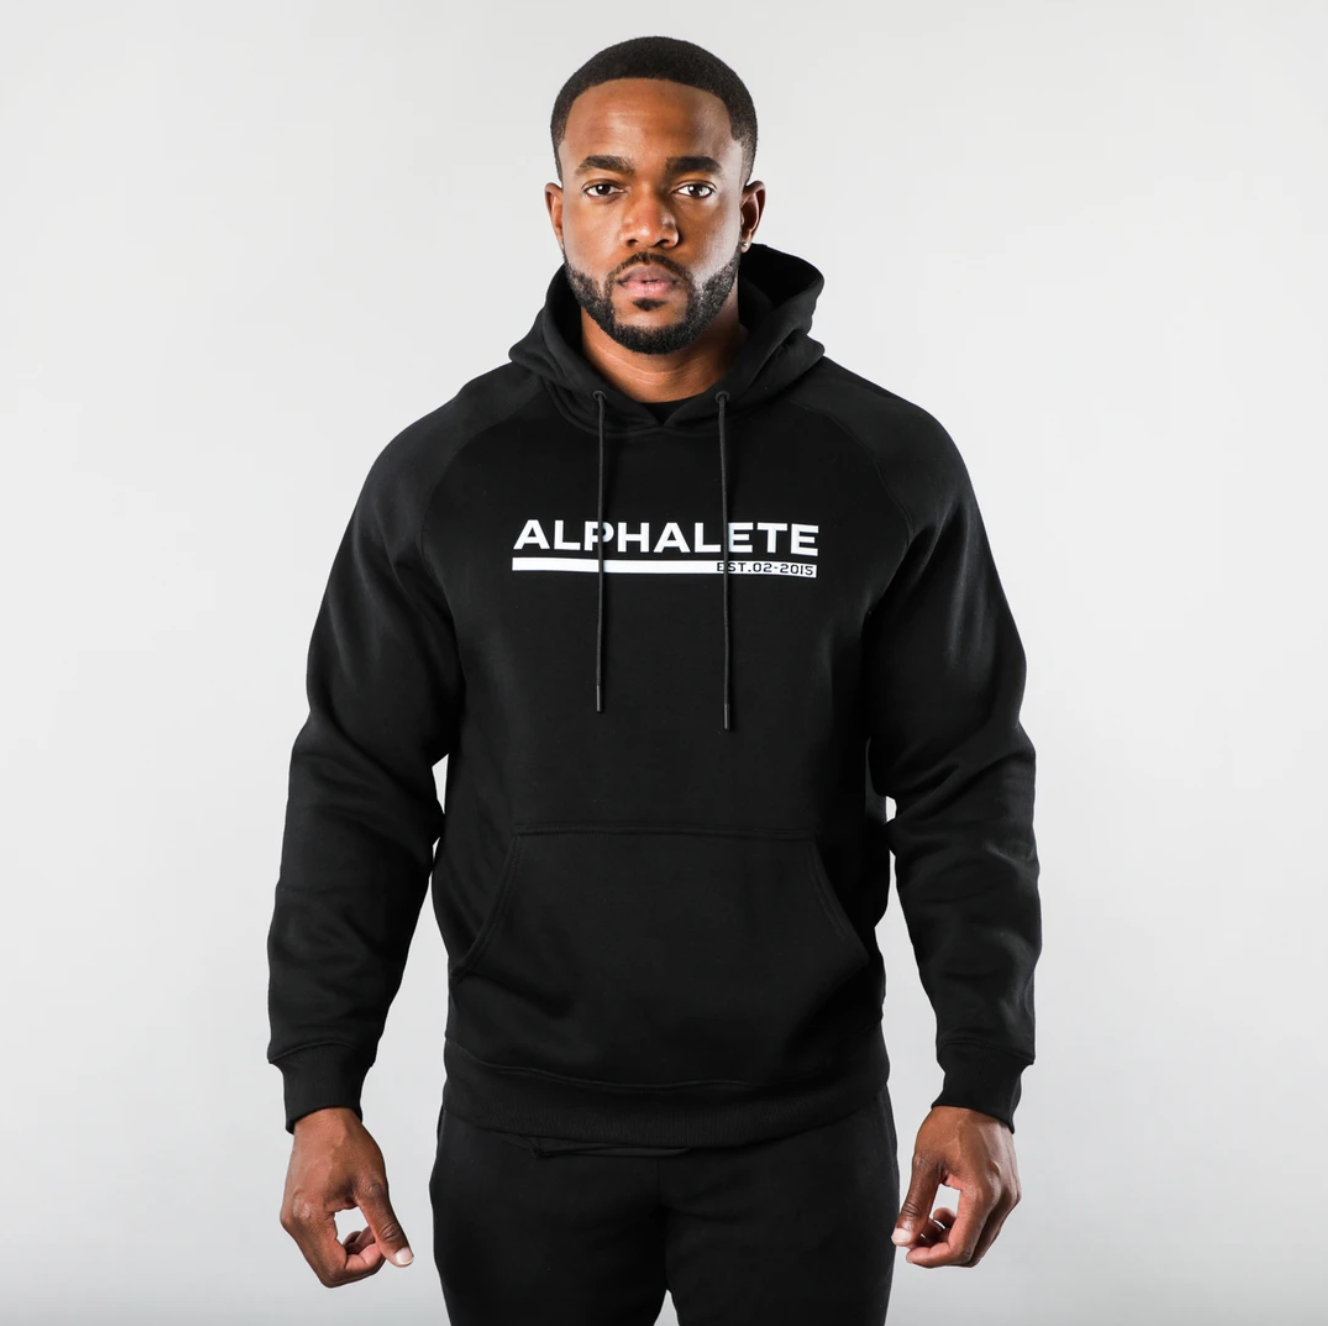 A male model poses in an Alphalete-branded hoodie.